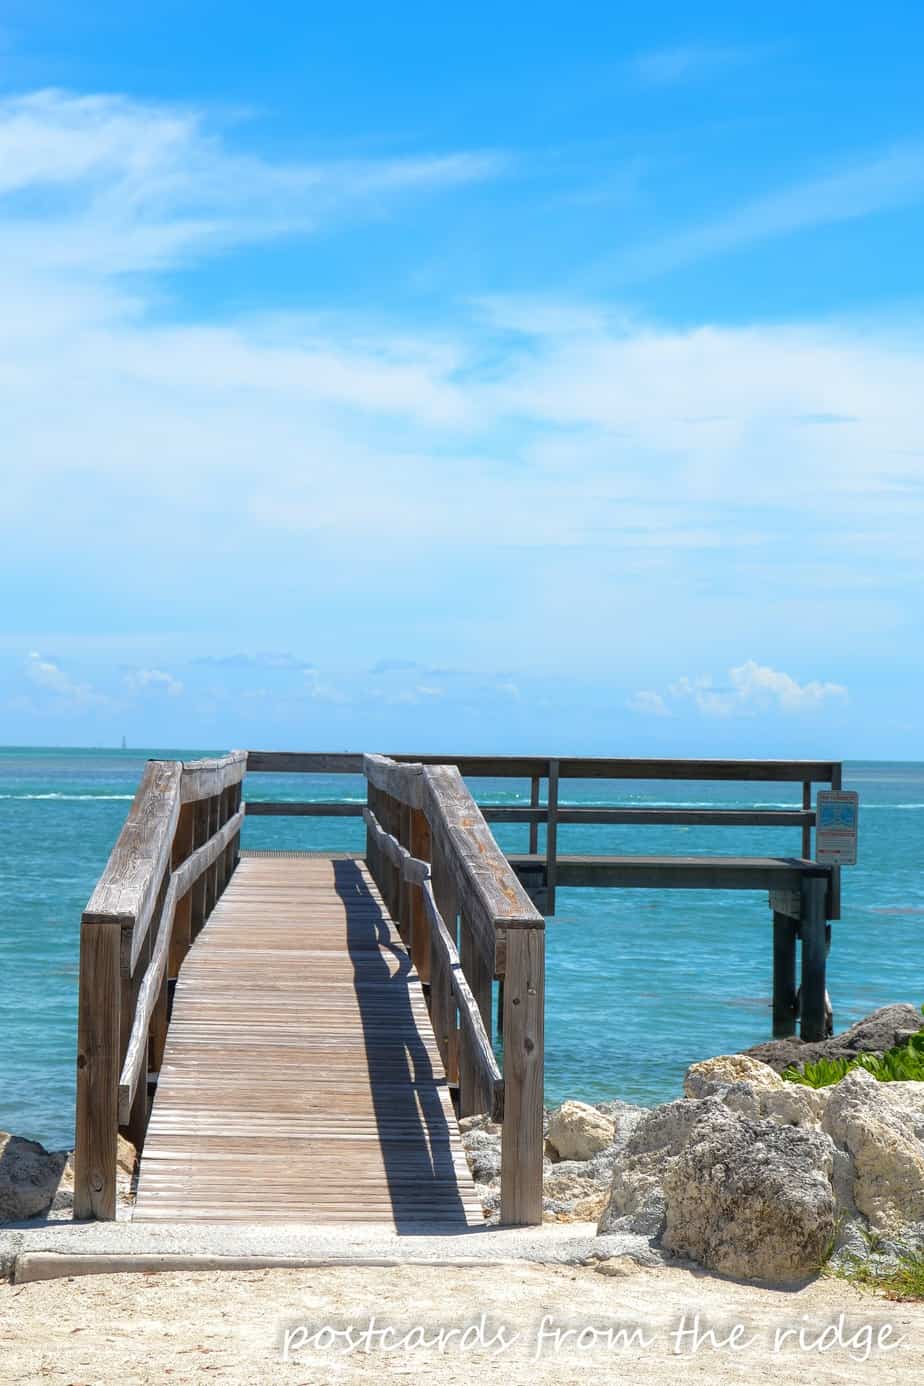 Things to see and do in the Florida Keys